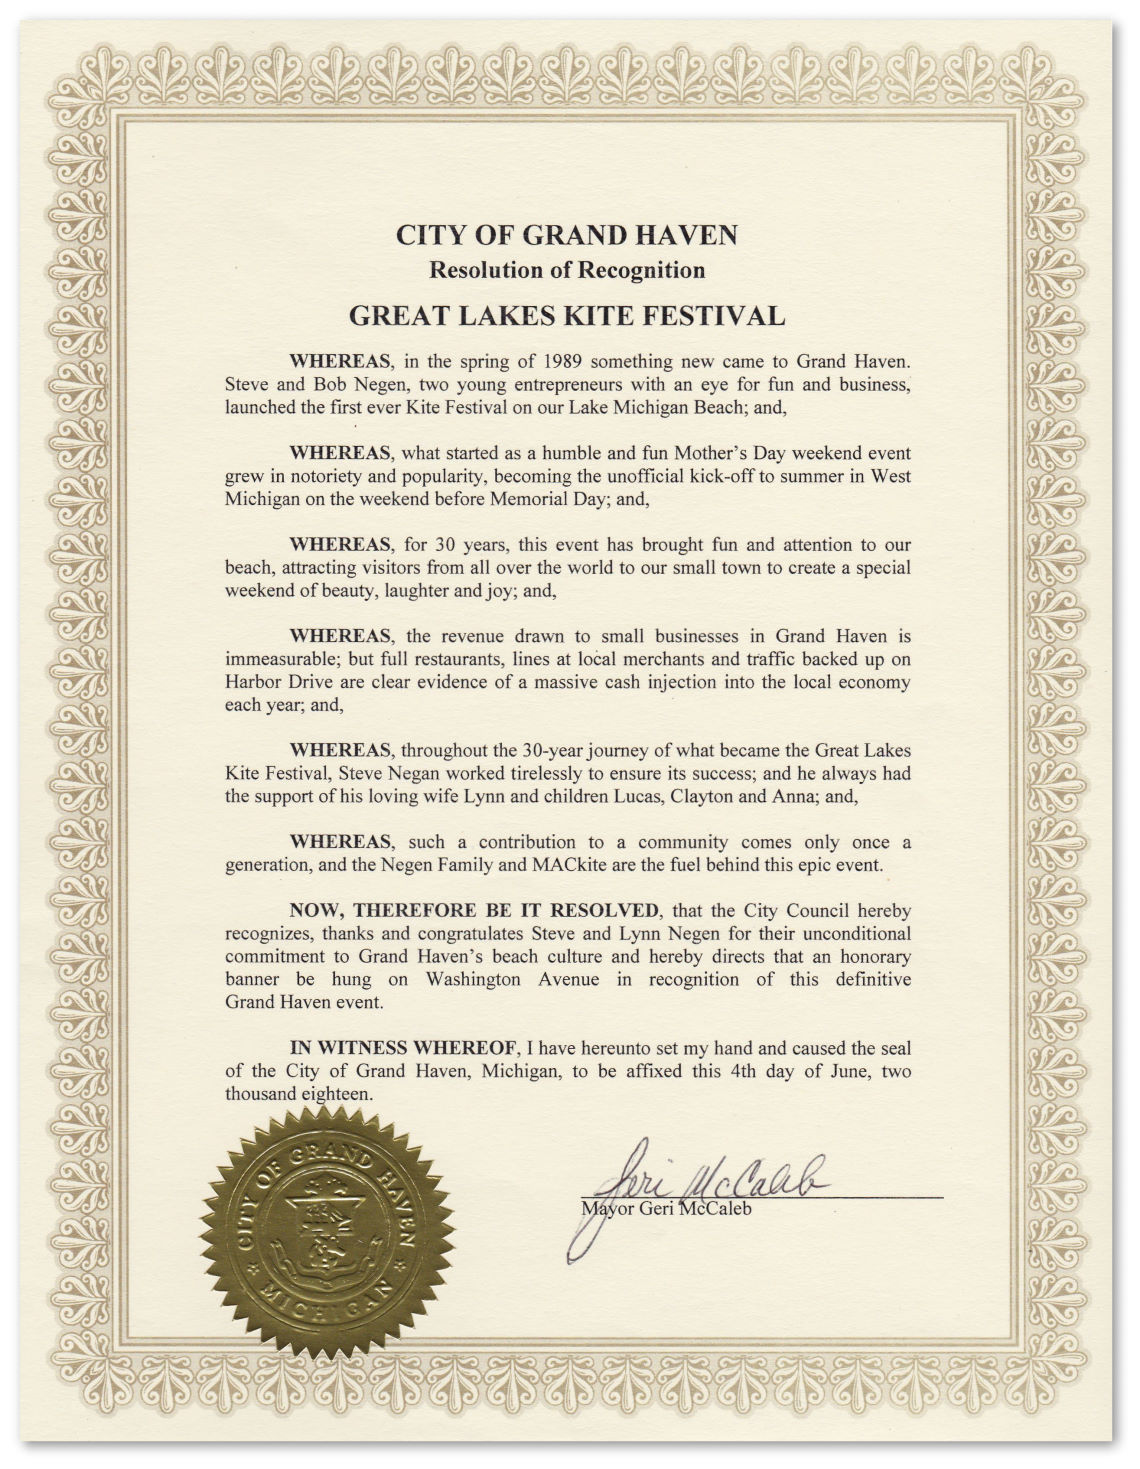 City of Grand Haven Resolution of Recognition for the Great Lakes Kite Festival